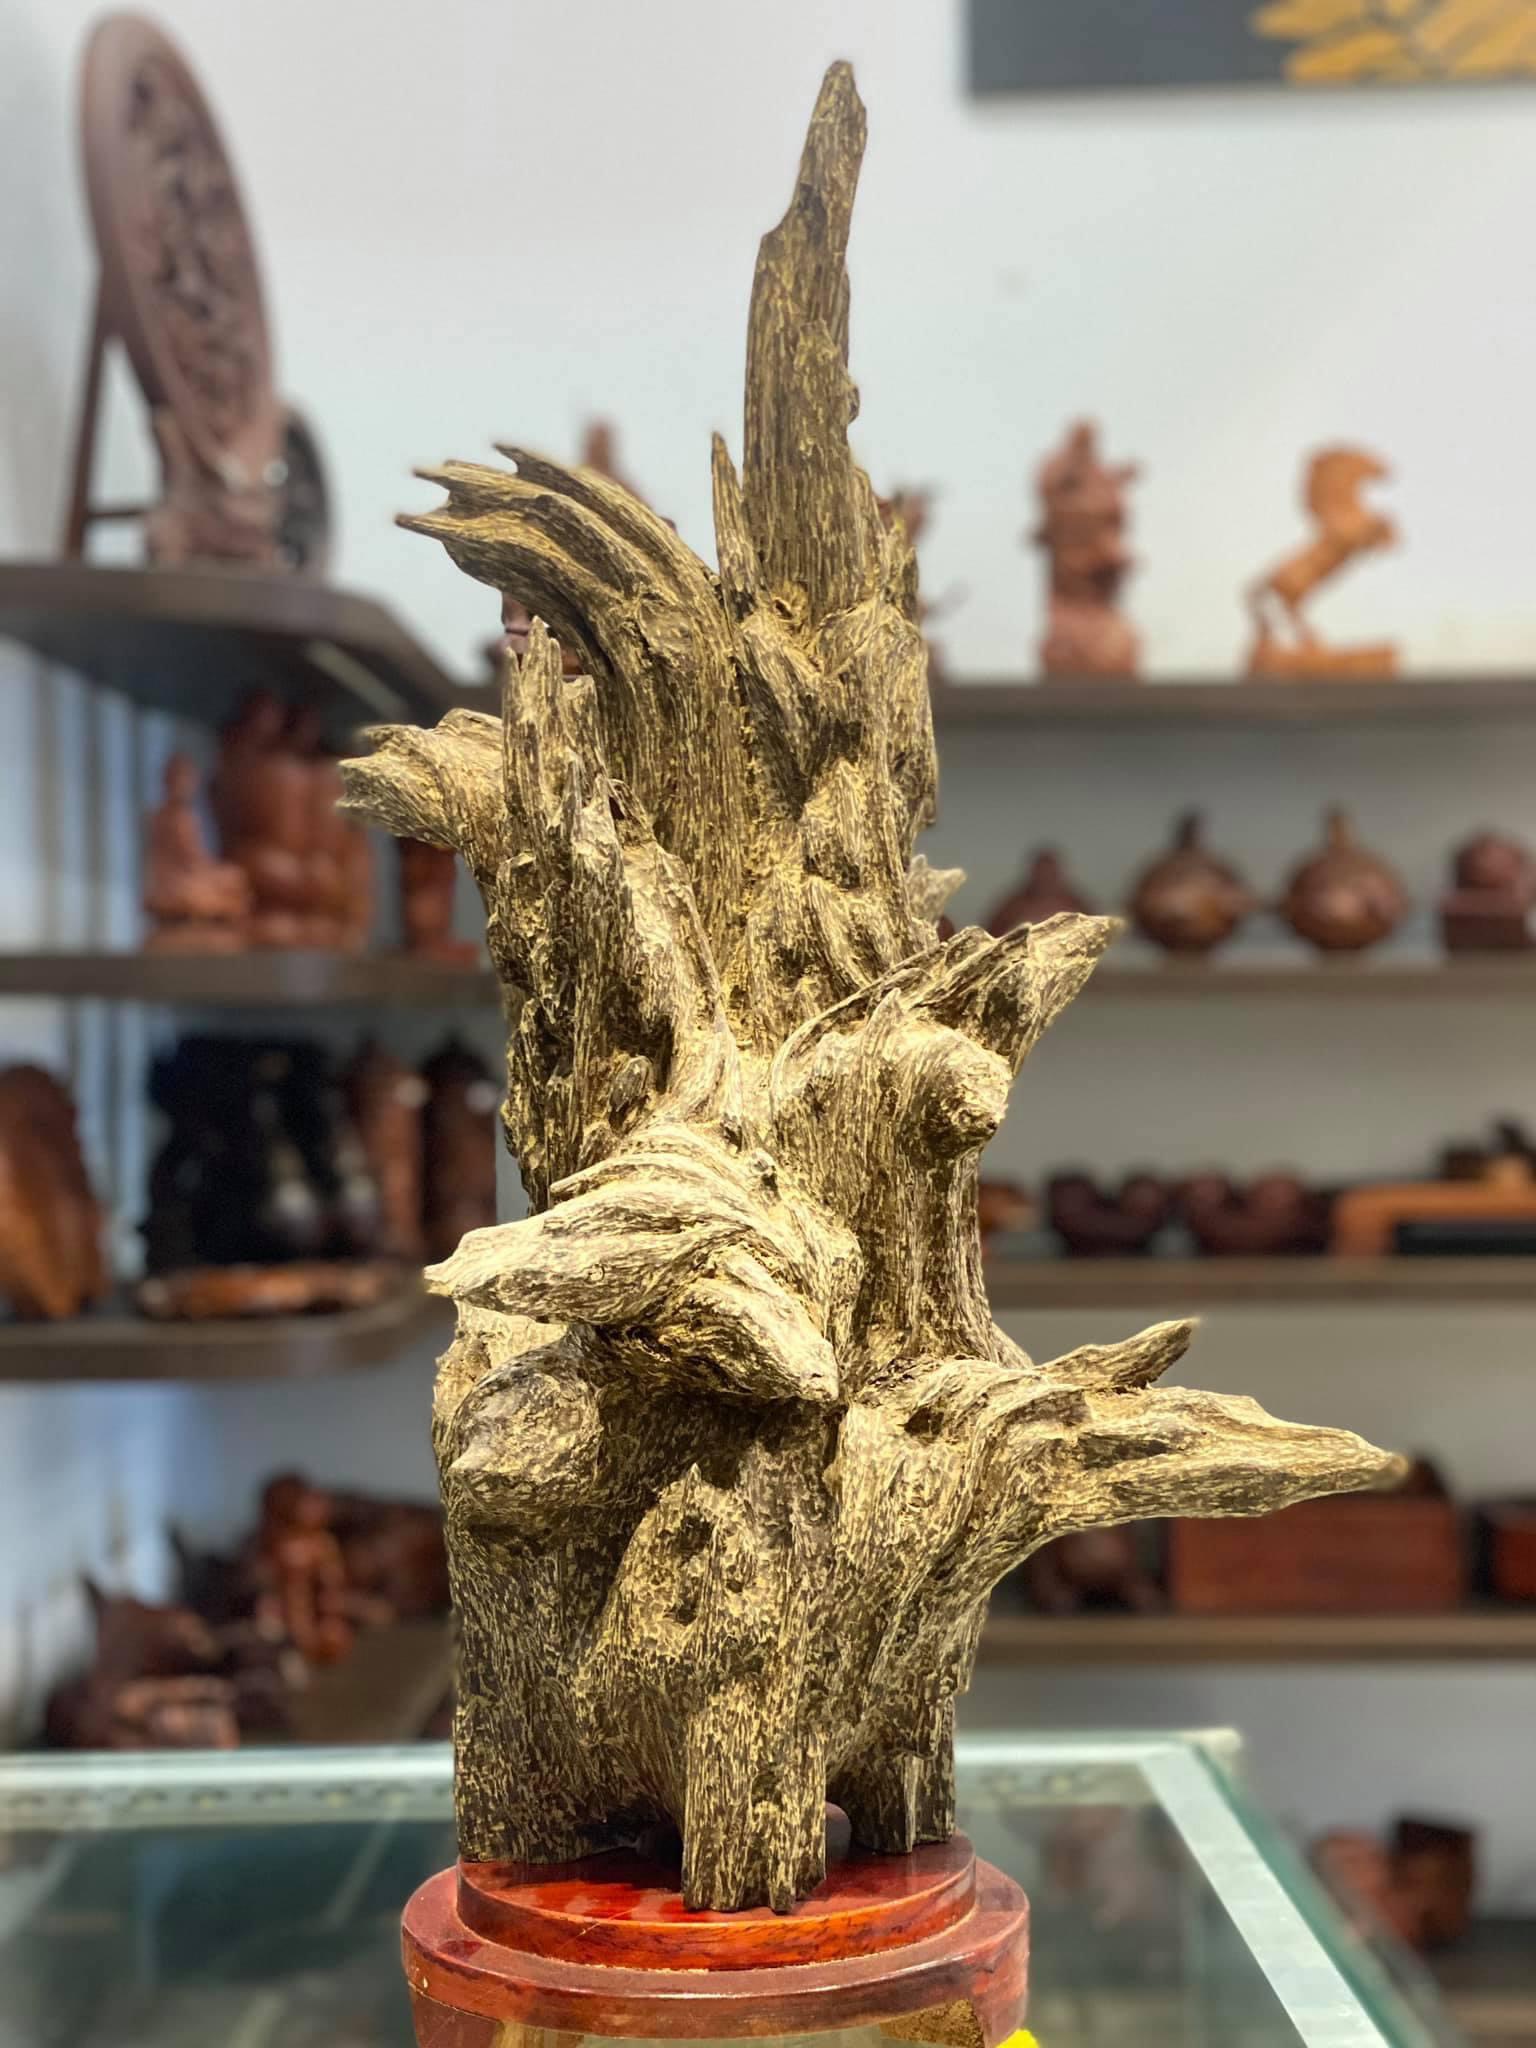 Agarwood Fine Art Used For Feng Shui Decoration To Bring Positive Energy To Living Space - Agarwood Benefits